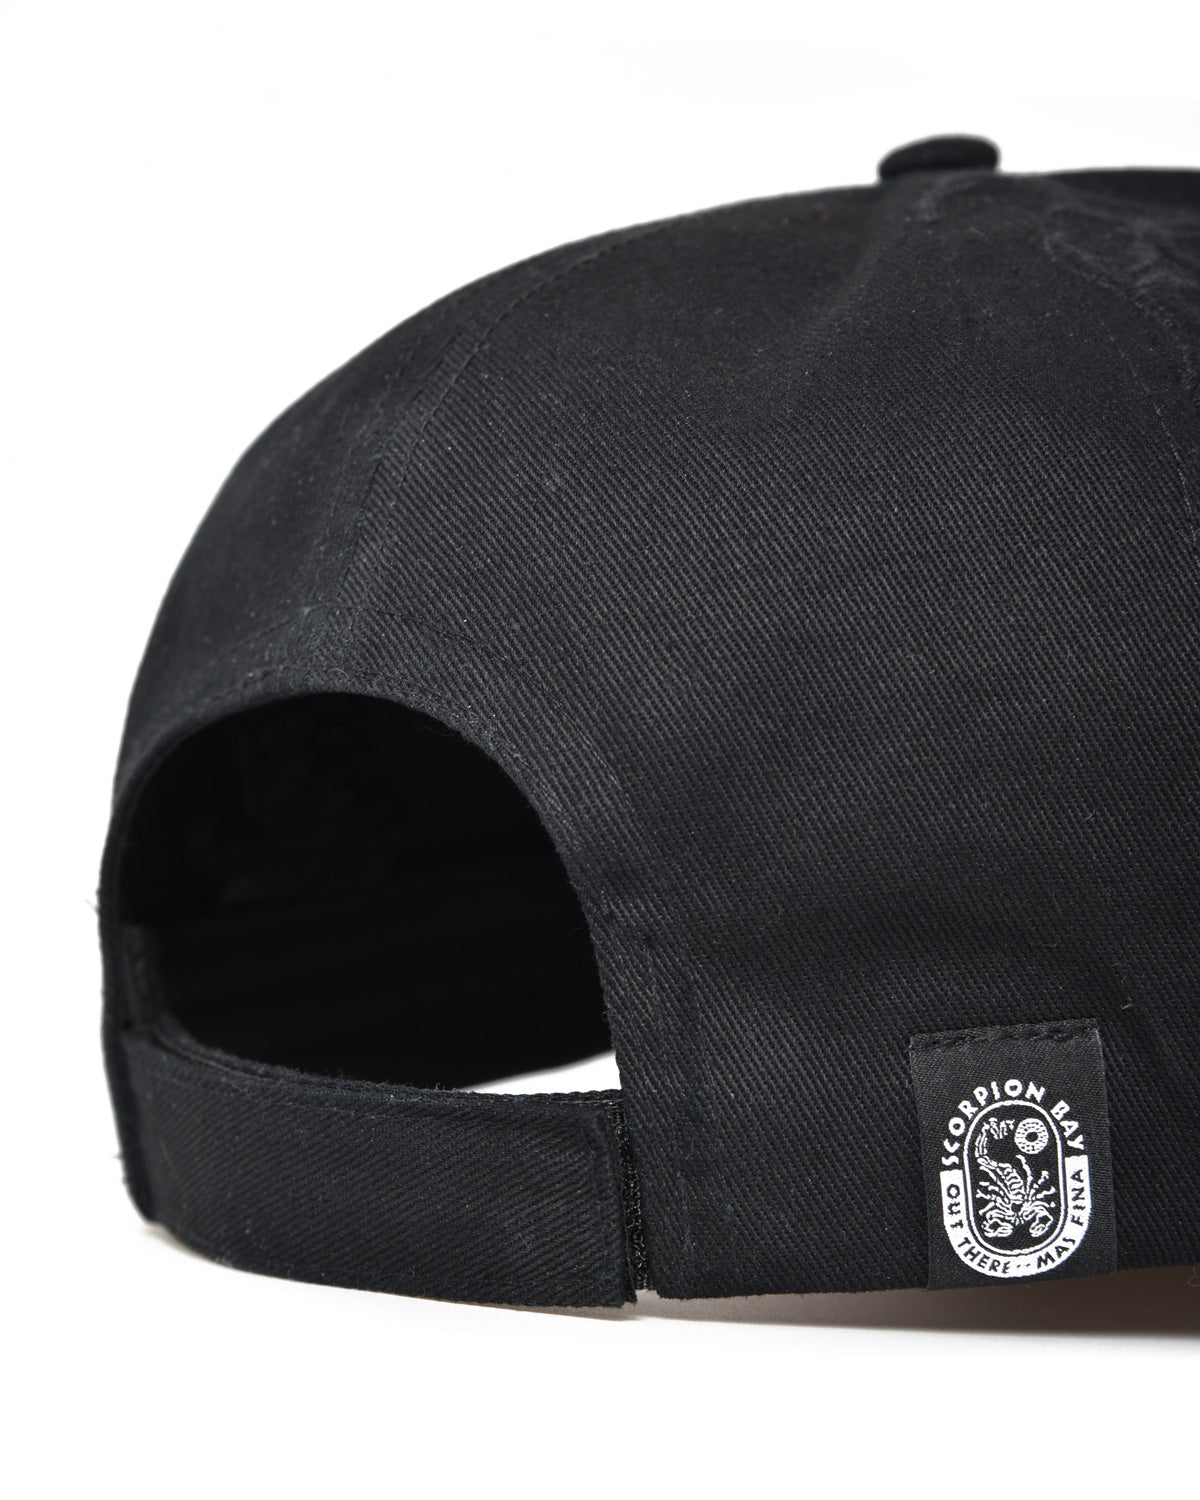 Black 100% Cotton Baseball Cap With Tone-On-Tone Embroidered Logo